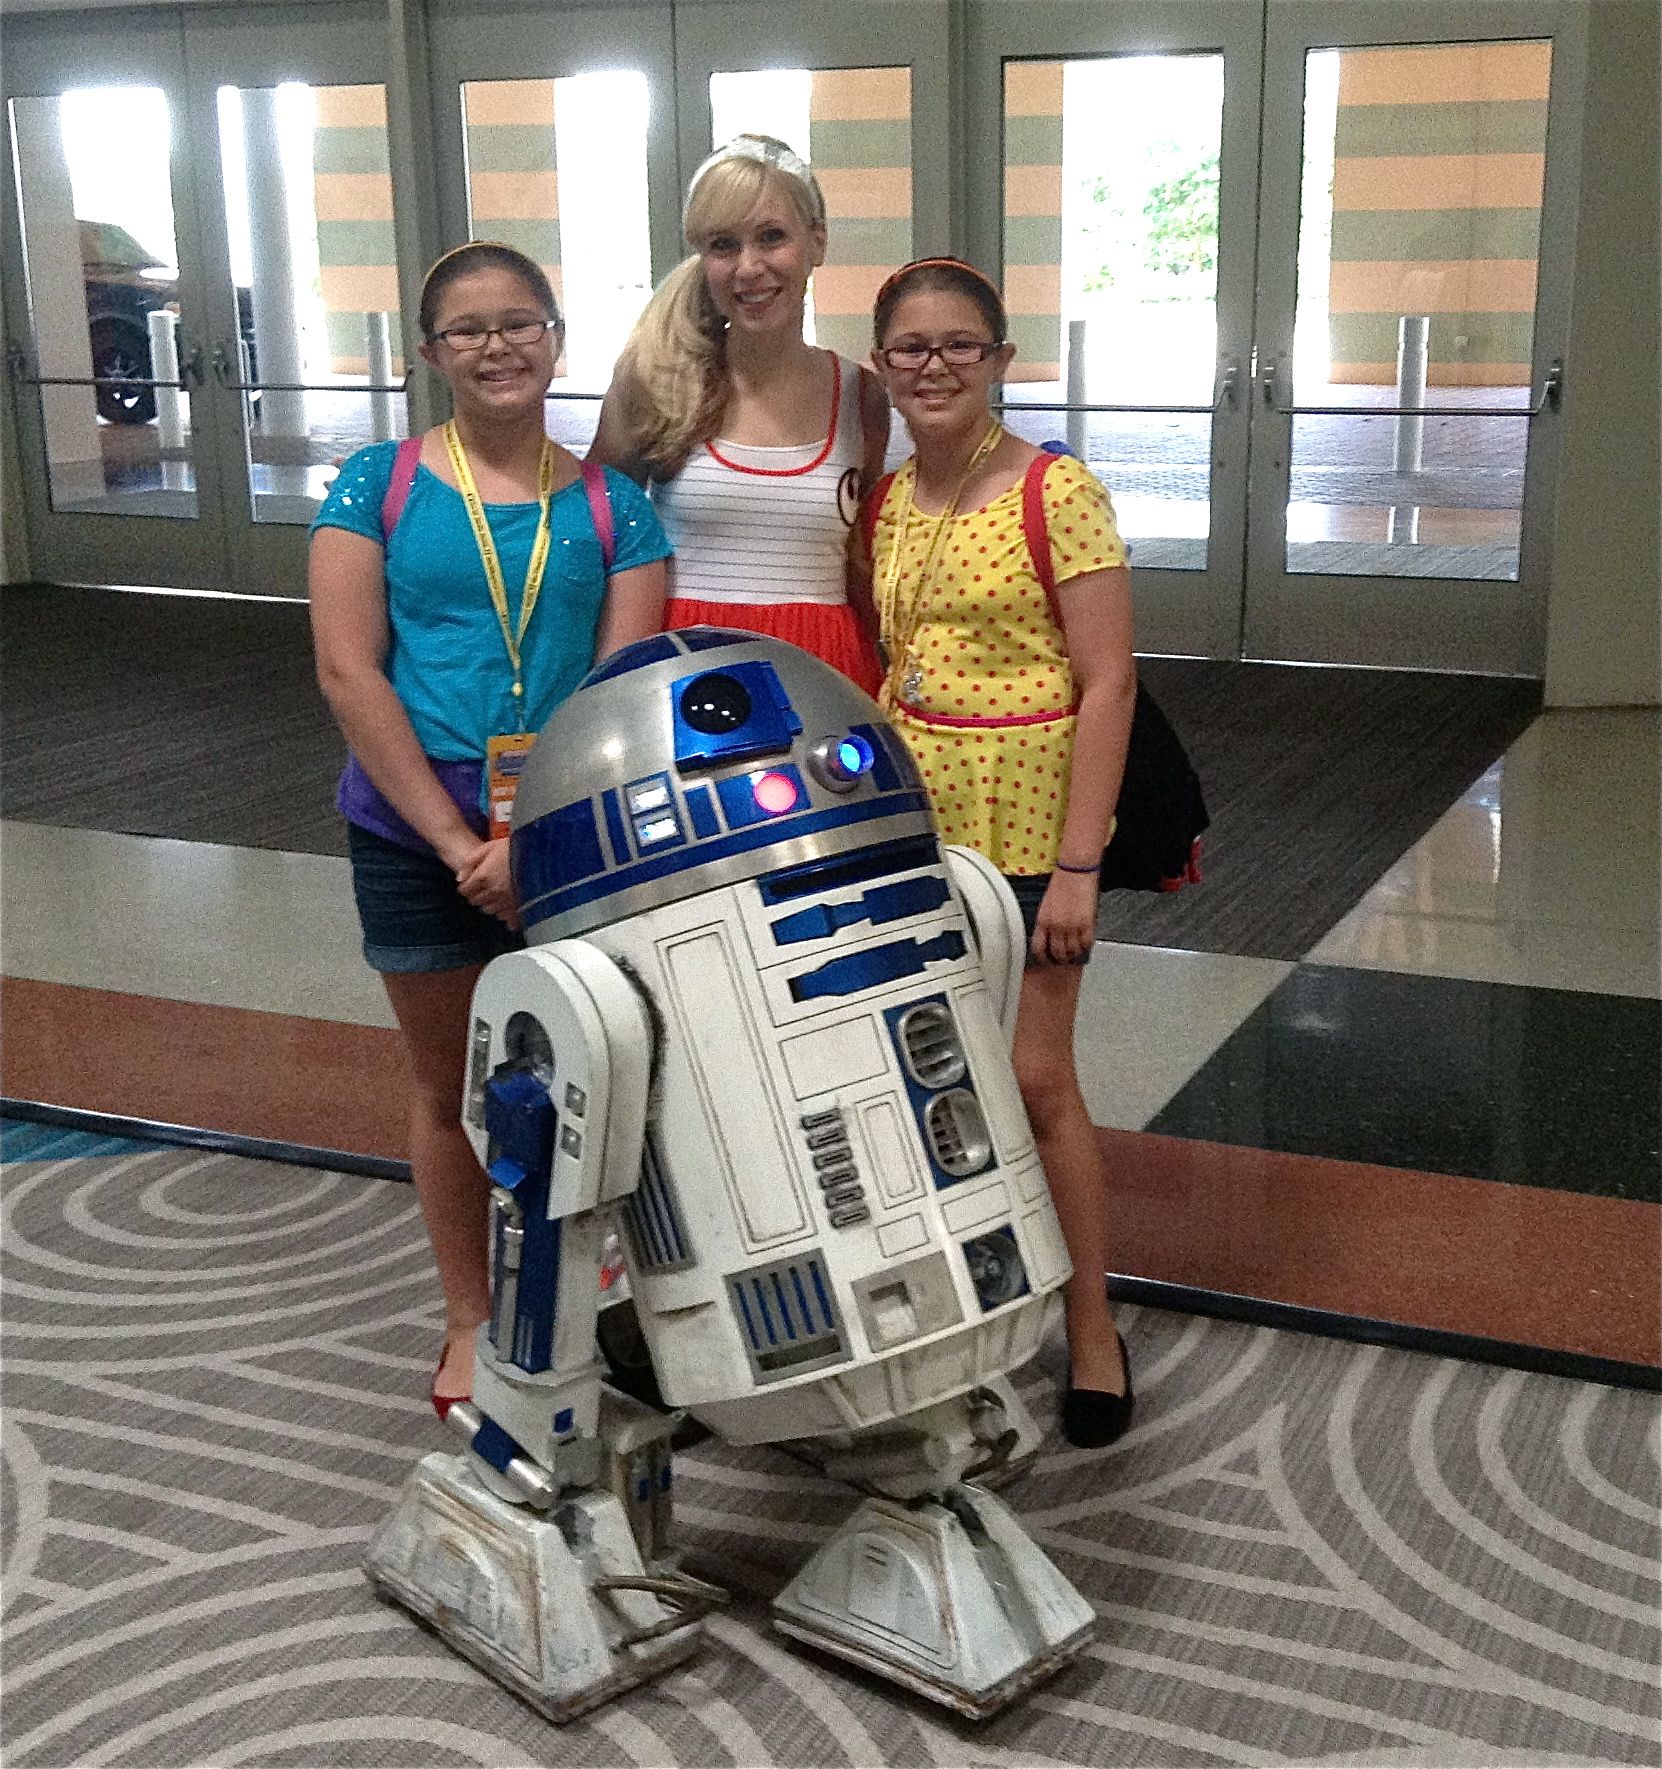 Girl love Sci-Fi too! Los Tweens meets Ashley Eckstein 'Her Universe' Creator and Voice of Ahsoka Tano on Star Wars The Clone Wars to talk Sci-Fi and girl power at Disney Social Media Moms Celebration